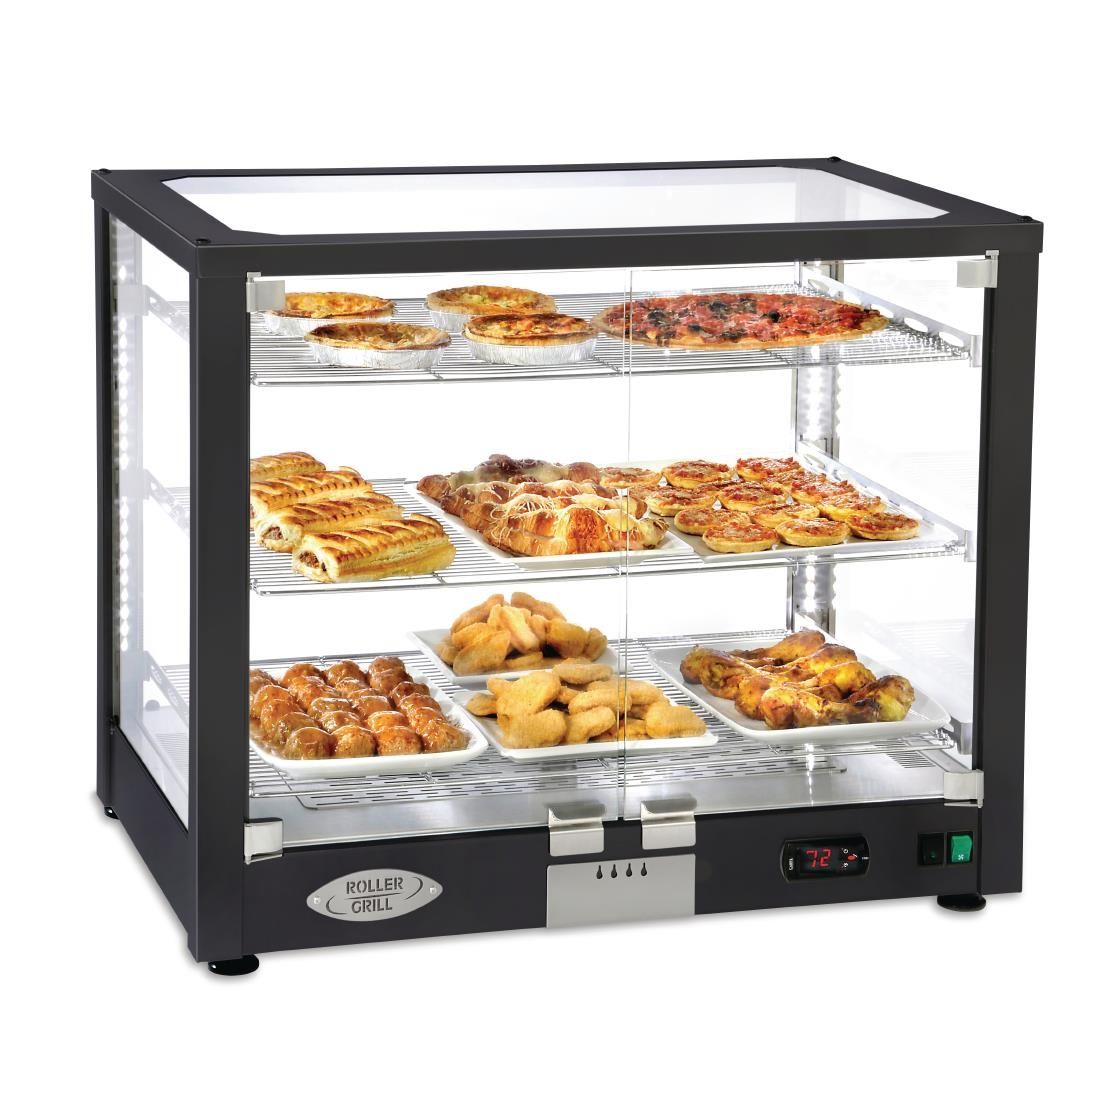 DF413 Roller Grill Heated 3 Shelf Display Cabinet WD780 DN JD Catering Equipment Solutions Ltd